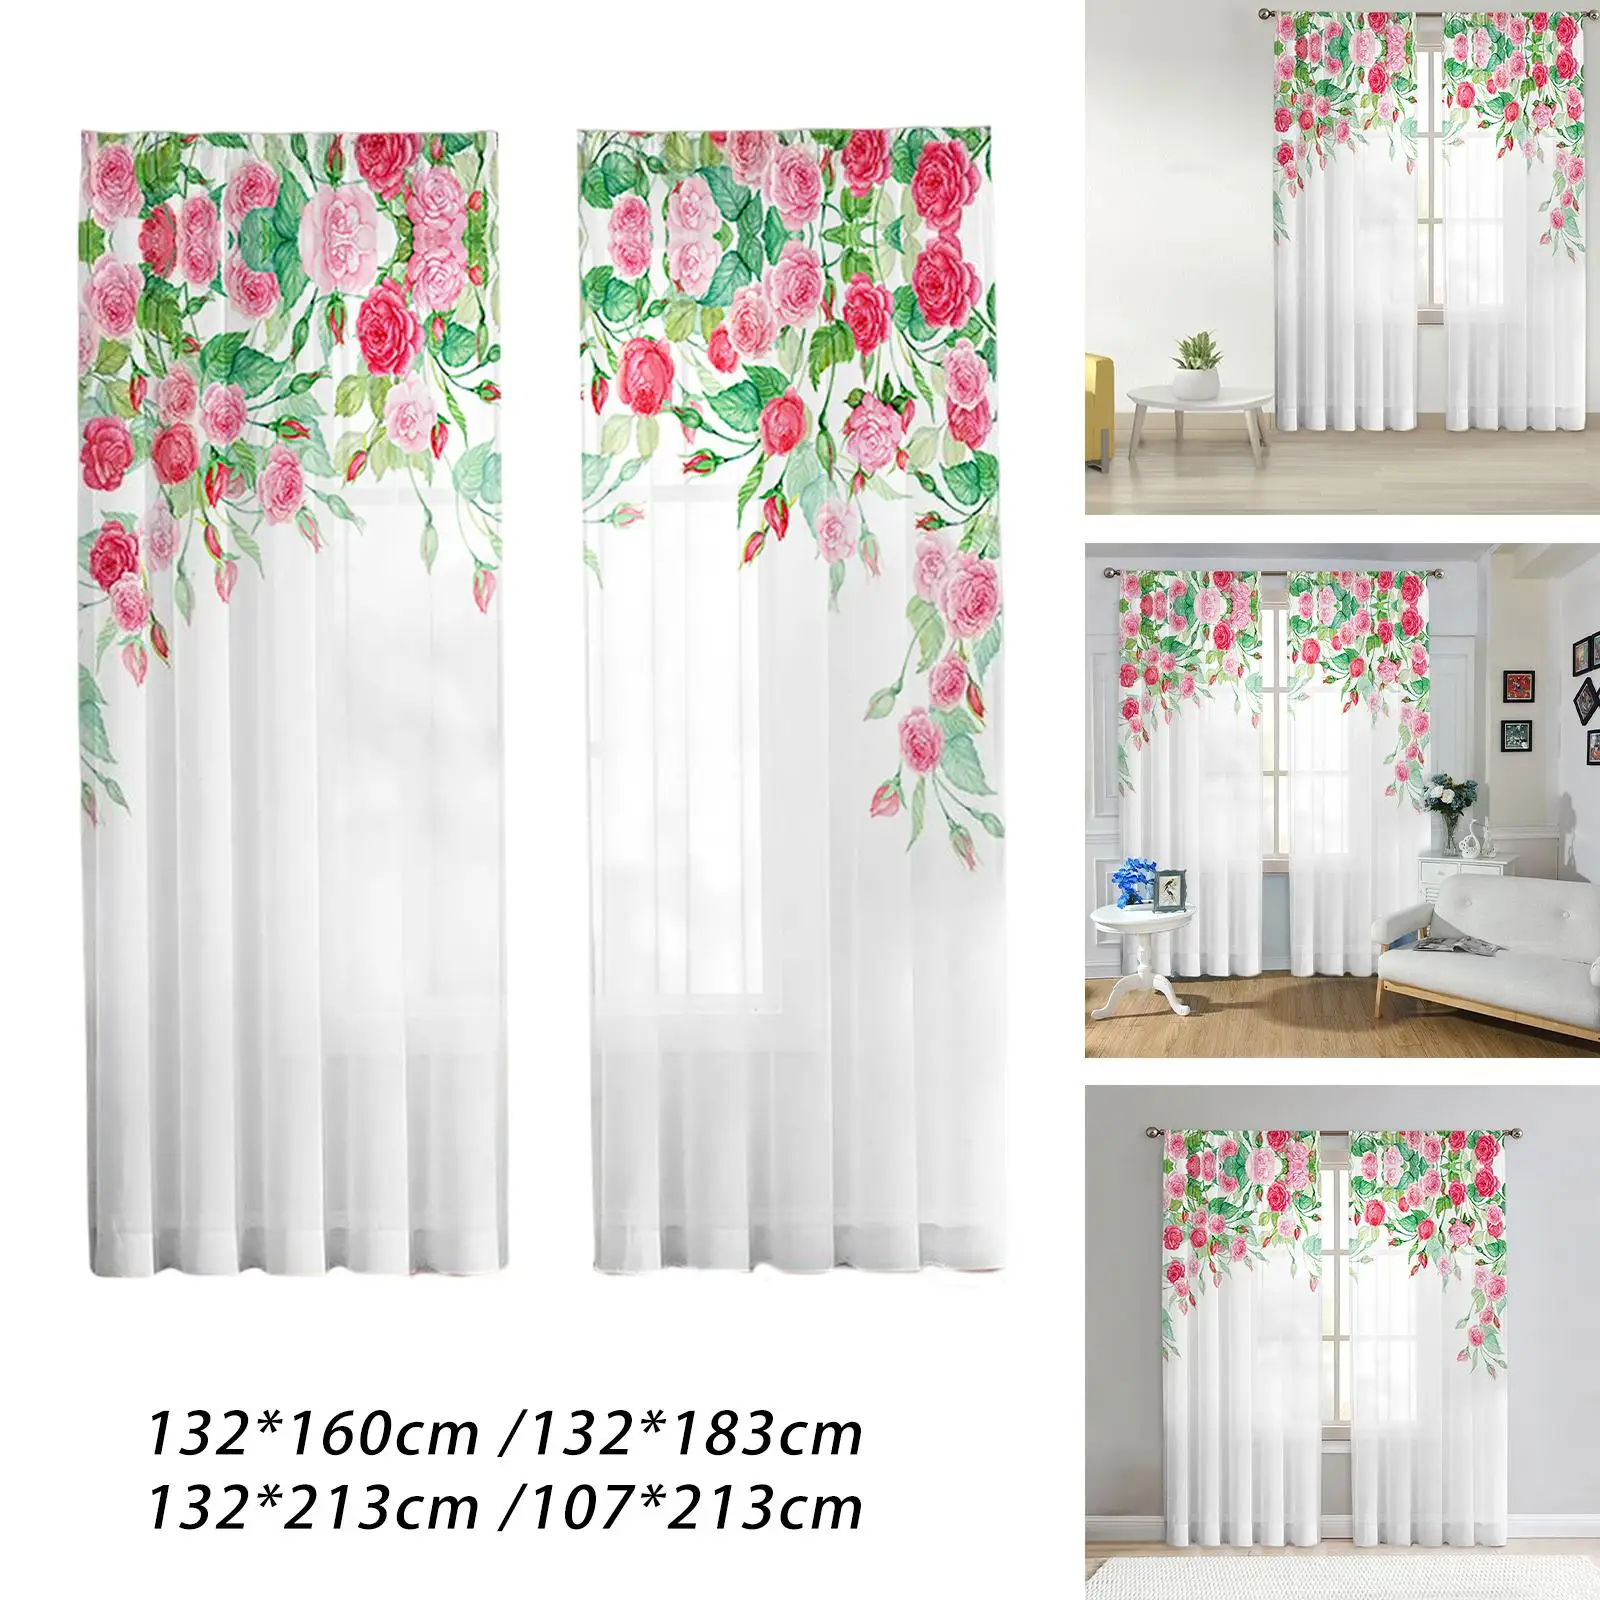 2x Printed Sheer Curtains Tulle Window Drapes Floral White Sheer Curtain for Dining Room Office Farmhouse Kitchen Room